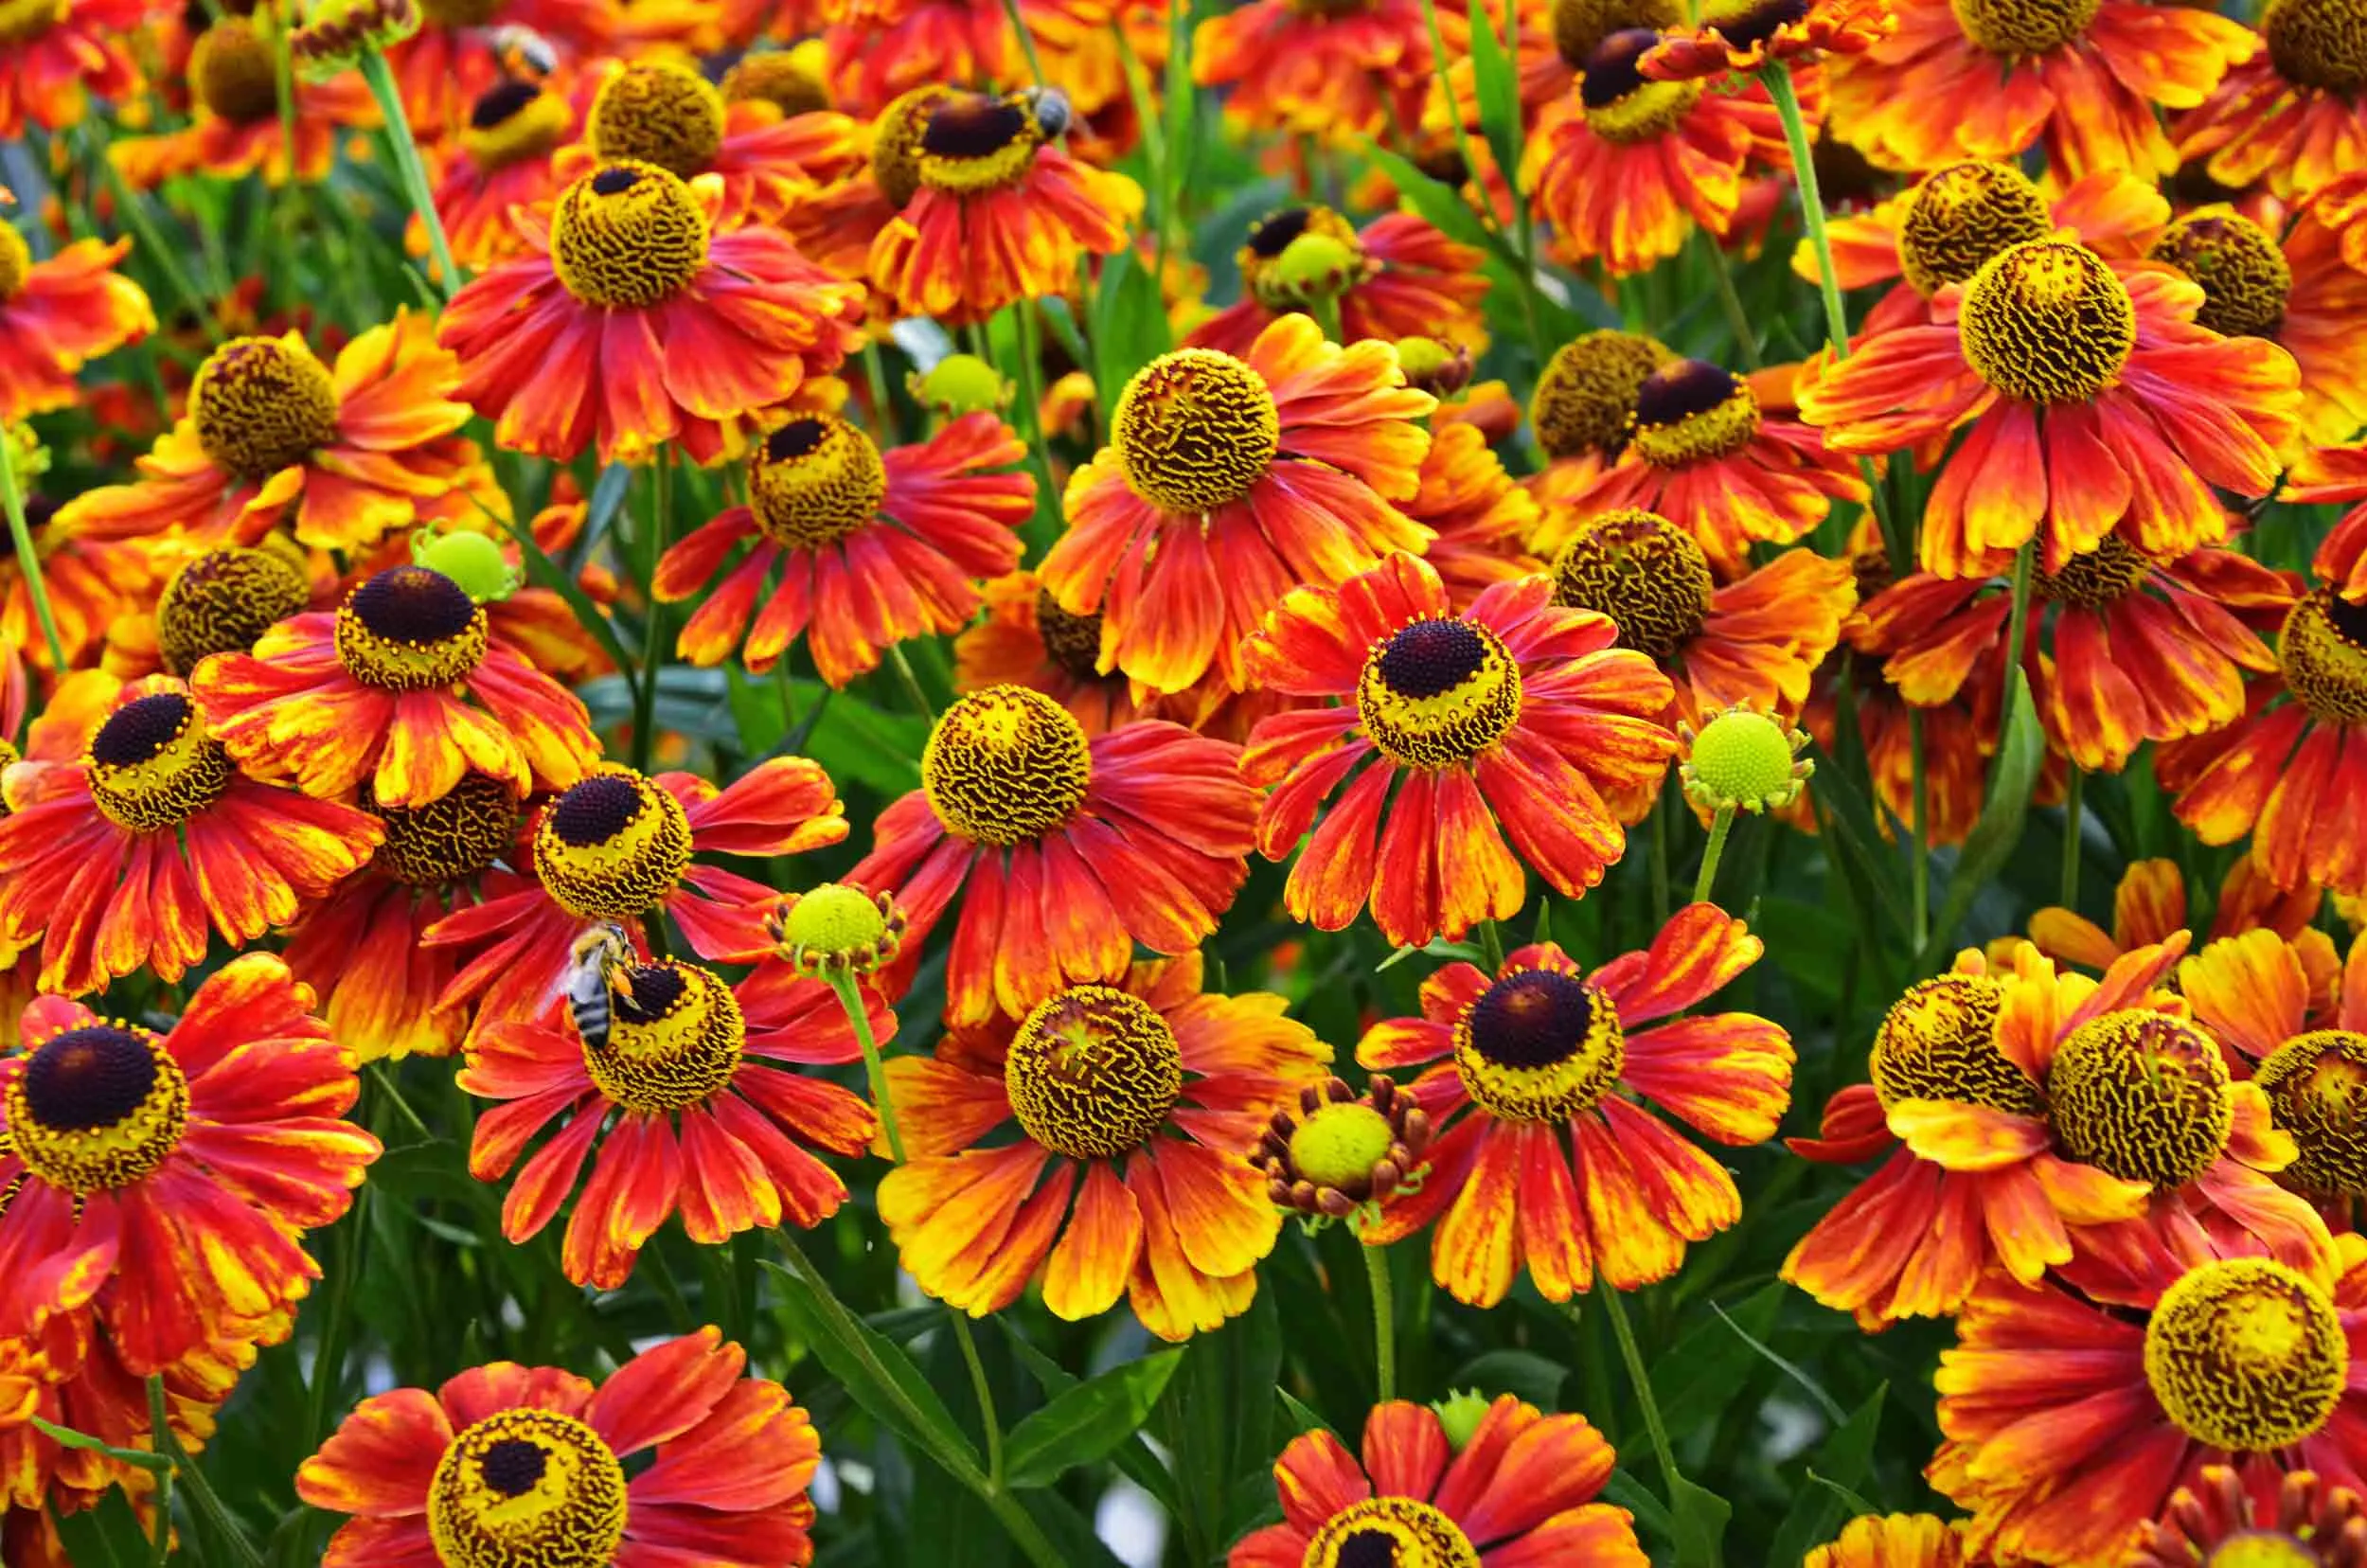 A field of orange and yellow Helenium.